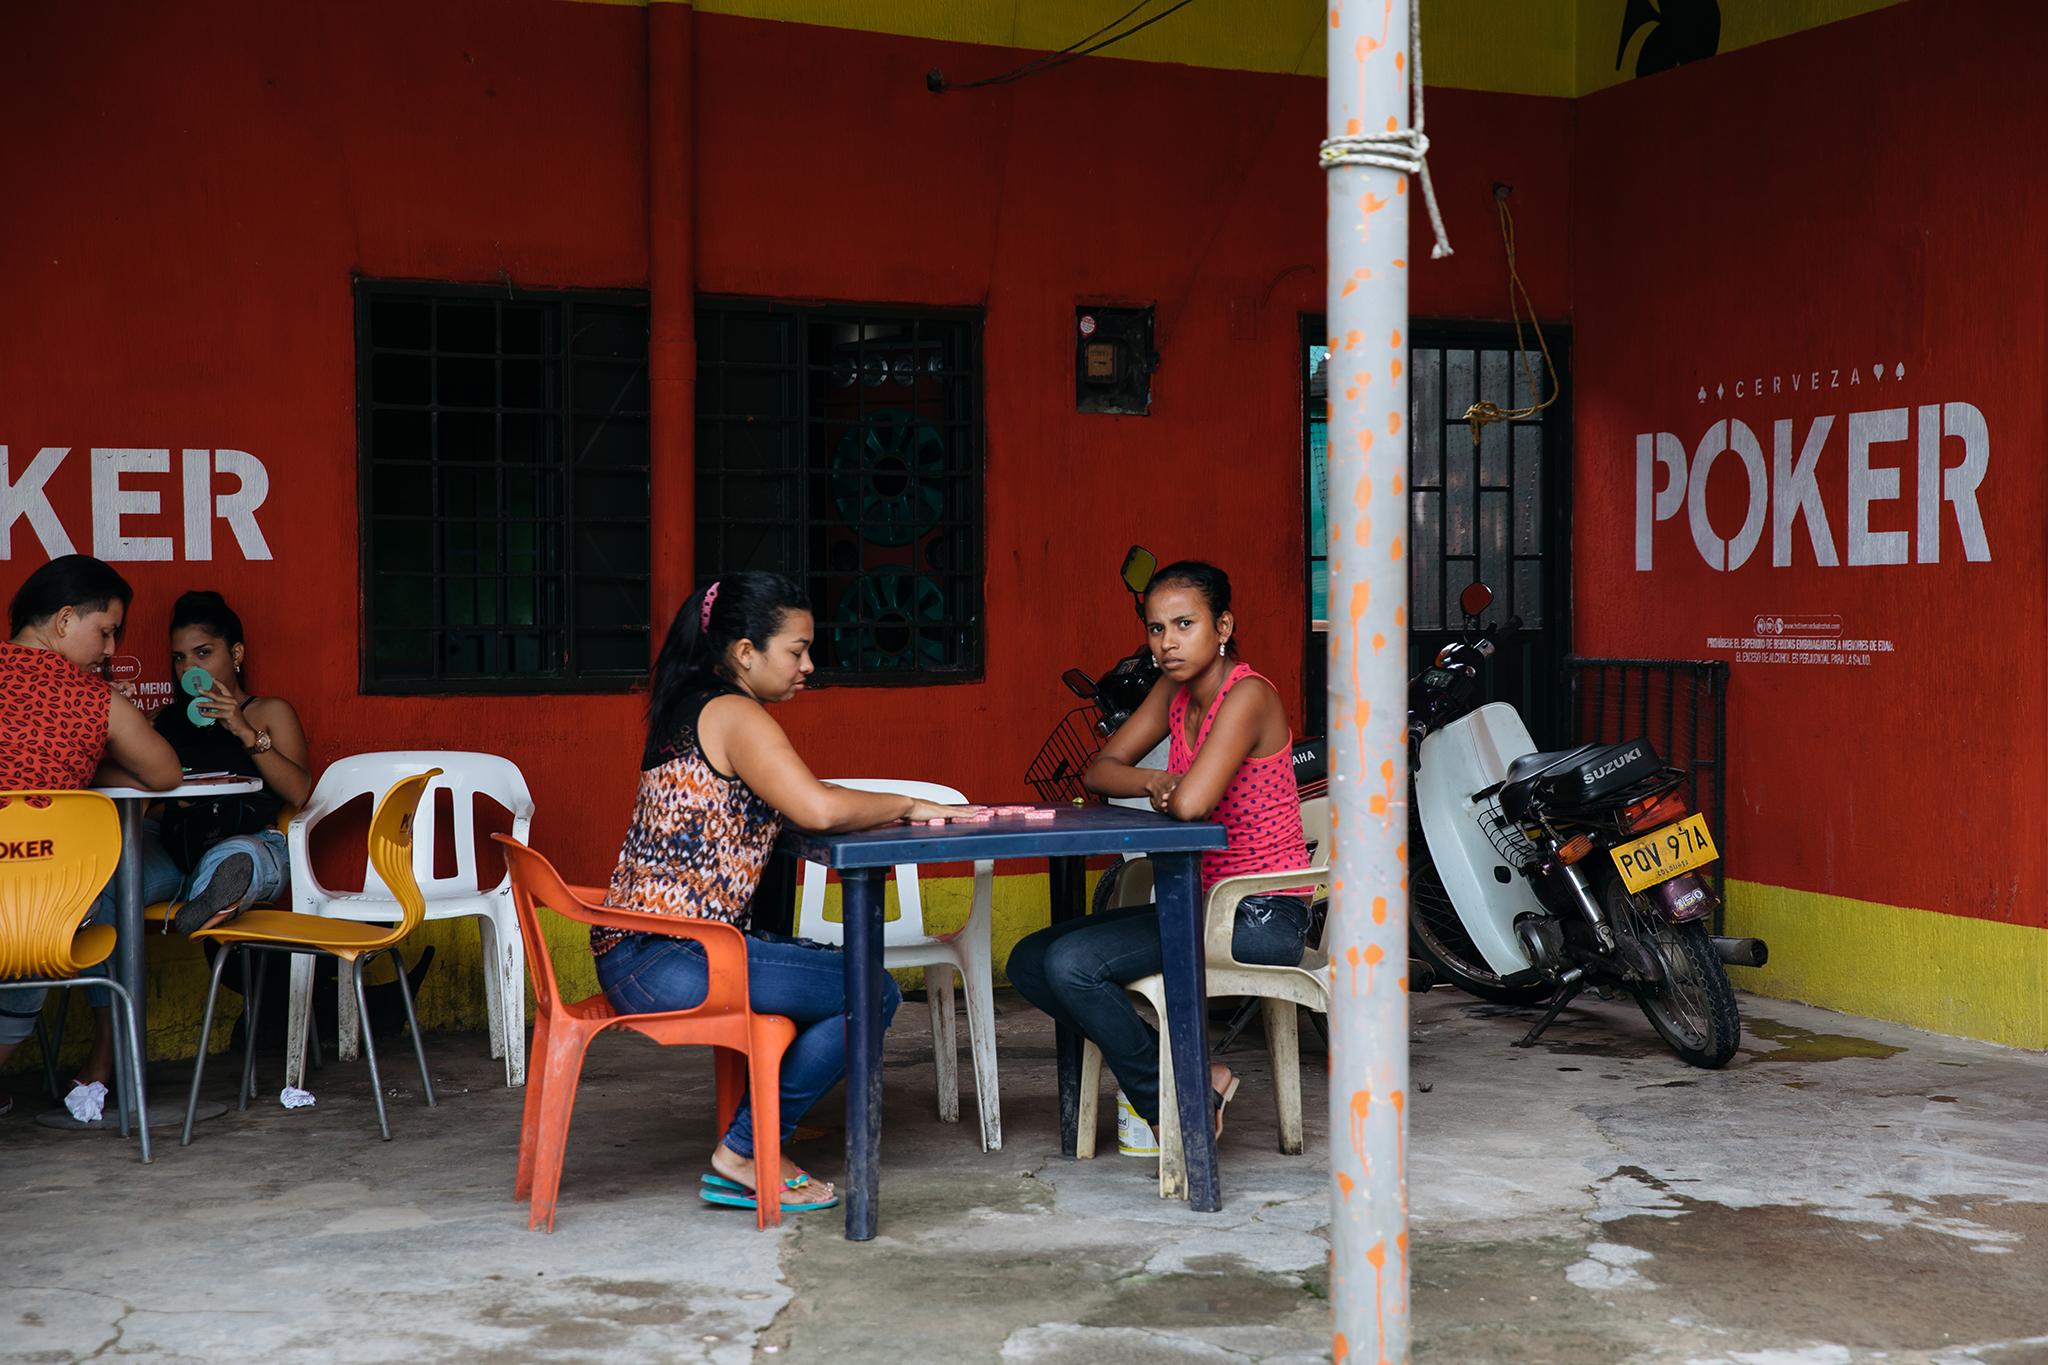 Around 15 brothels have popped up in the town of Arauca since the start of the crisis, their prices reduced, recruiting girls as young as 14 or 15 years old